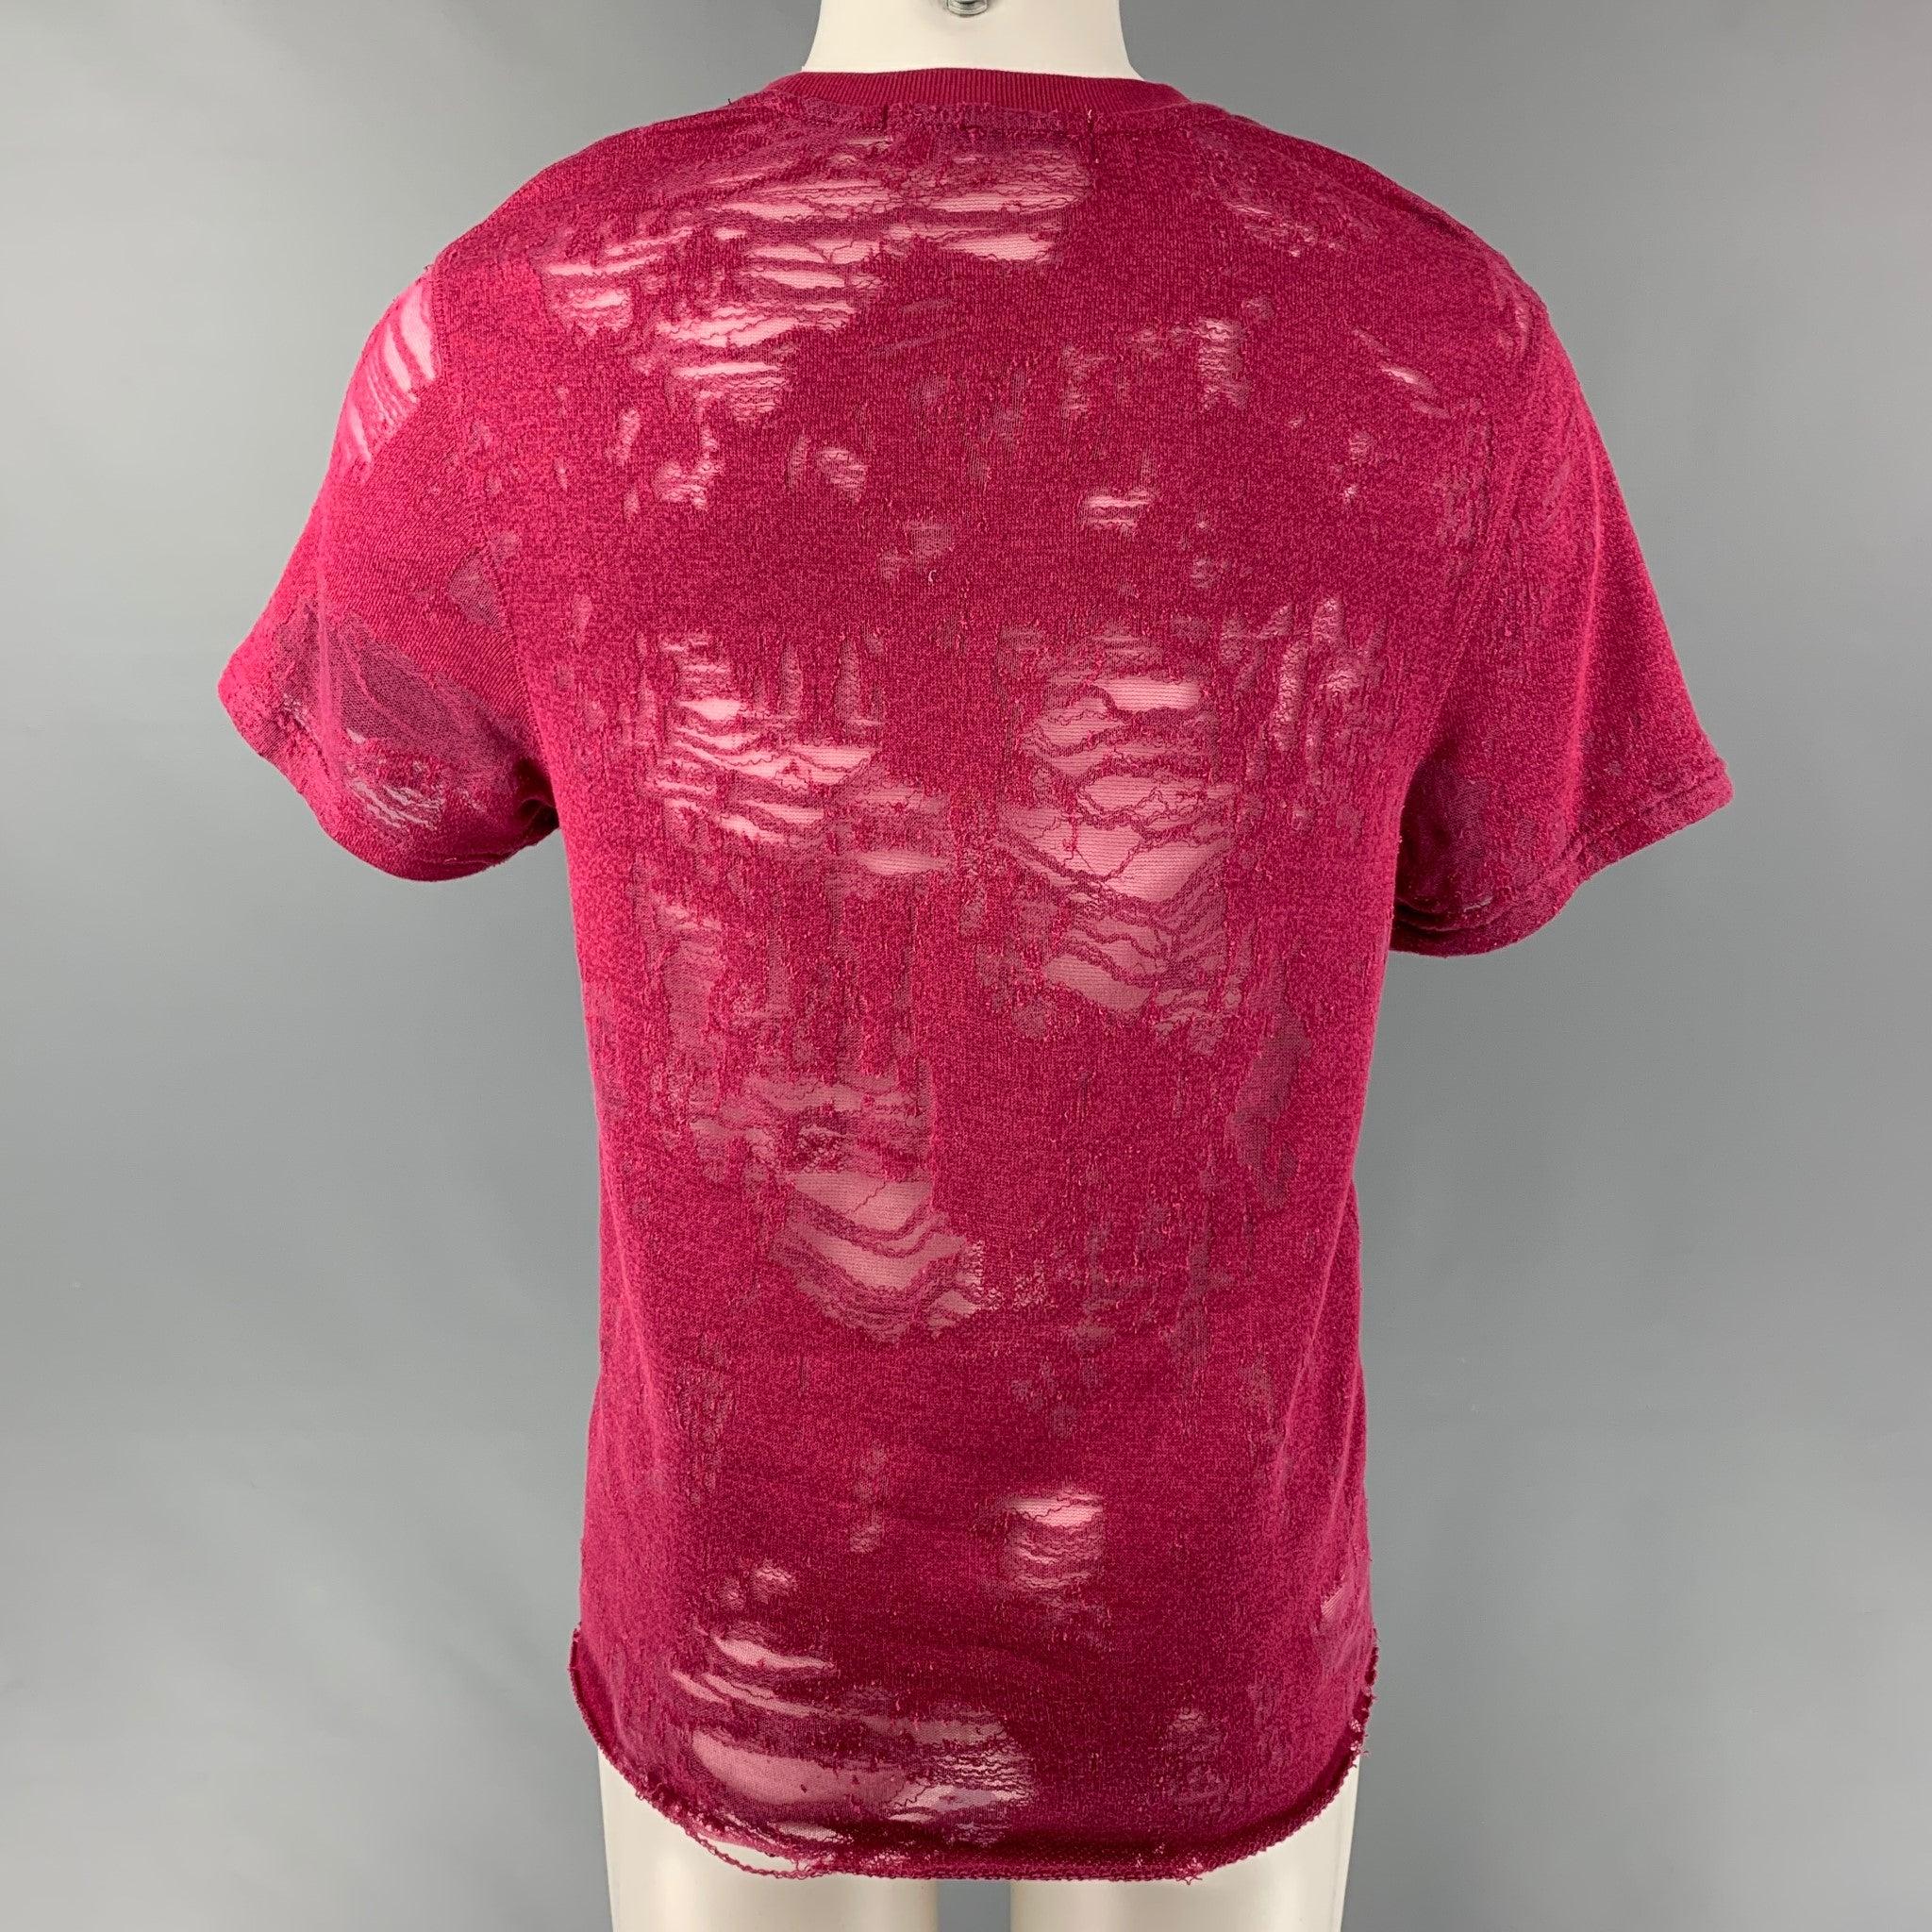 IRO Gaetane Size XS Burgundy Distressed Cotton Blend Crew-Neck T-shirt In Excellent Condition For Sale In San Francisco, CA